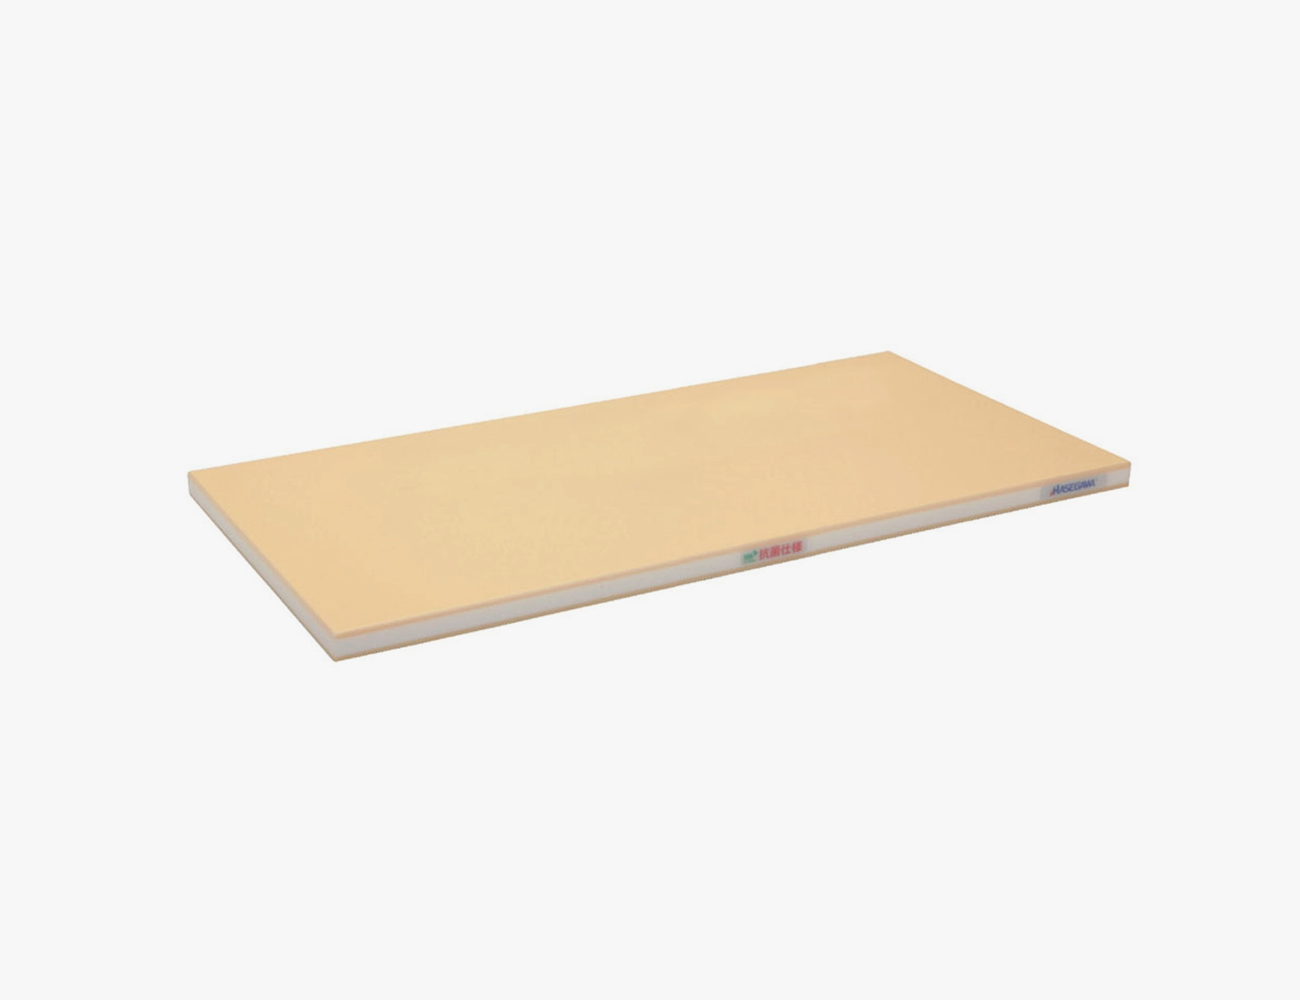 SYNTHETIC RUBBER CUTTING BOARD M 38X 21X1.3 POPULAR AMONG CHEFS MADE IN  JAPAN